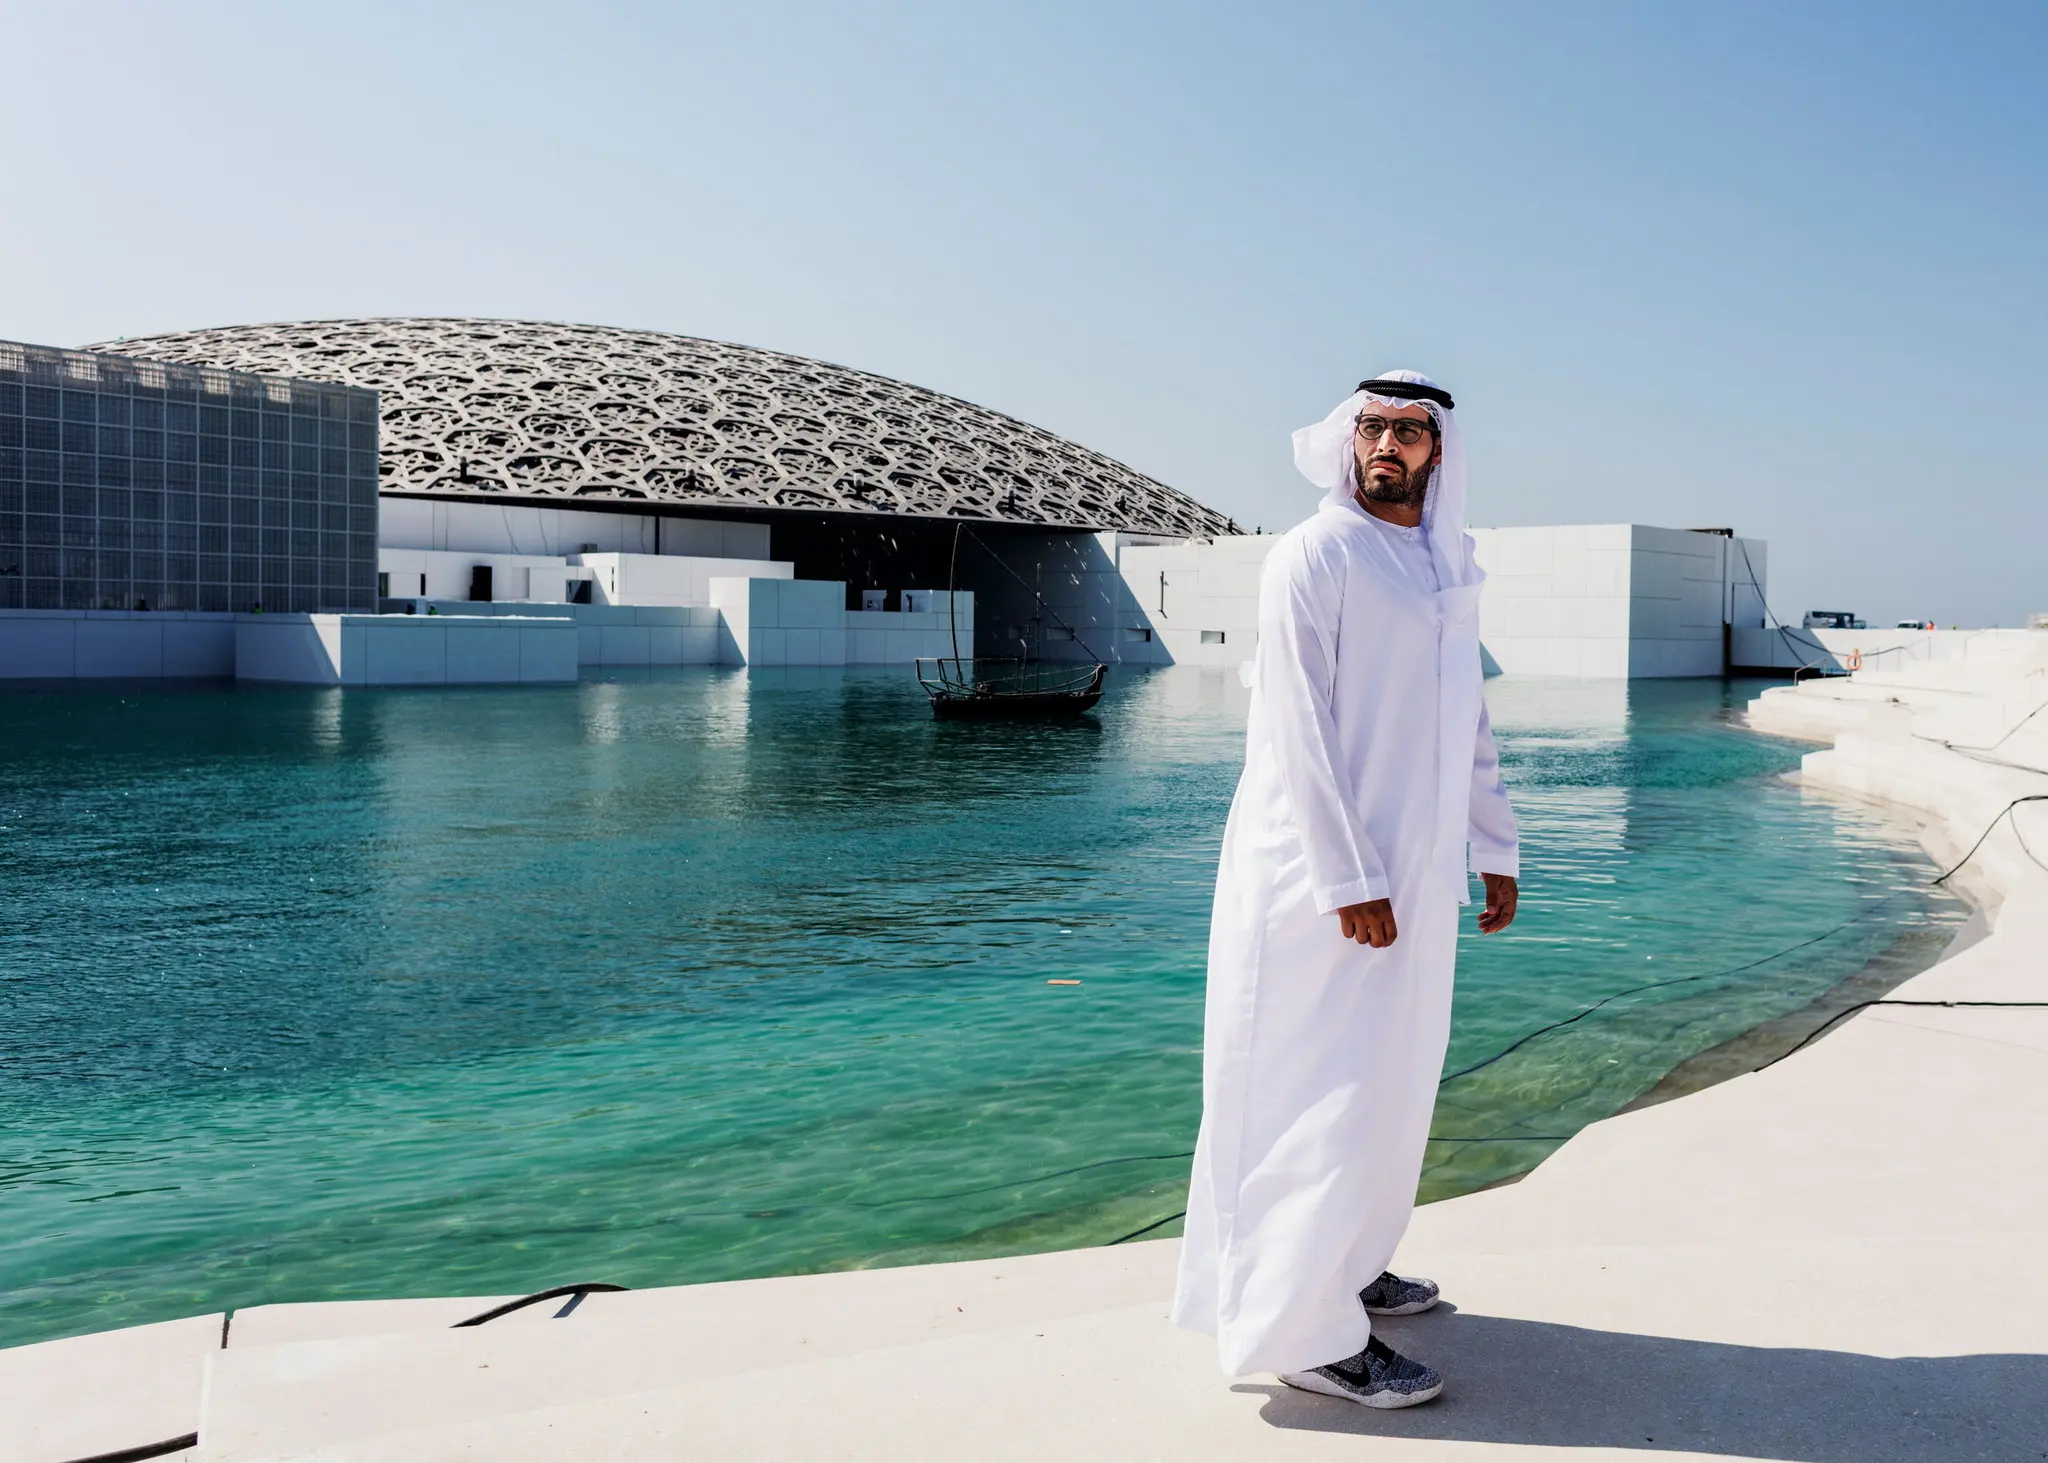 A man dressed in traditional white Middle Eastern attire stands near a body of water with the modern dome-shaped structure of the Louvre Abu Dhabi visible in the background. The building's intricate lattice design contrasts with the clear blue sky and the turquoise water surrounding it.